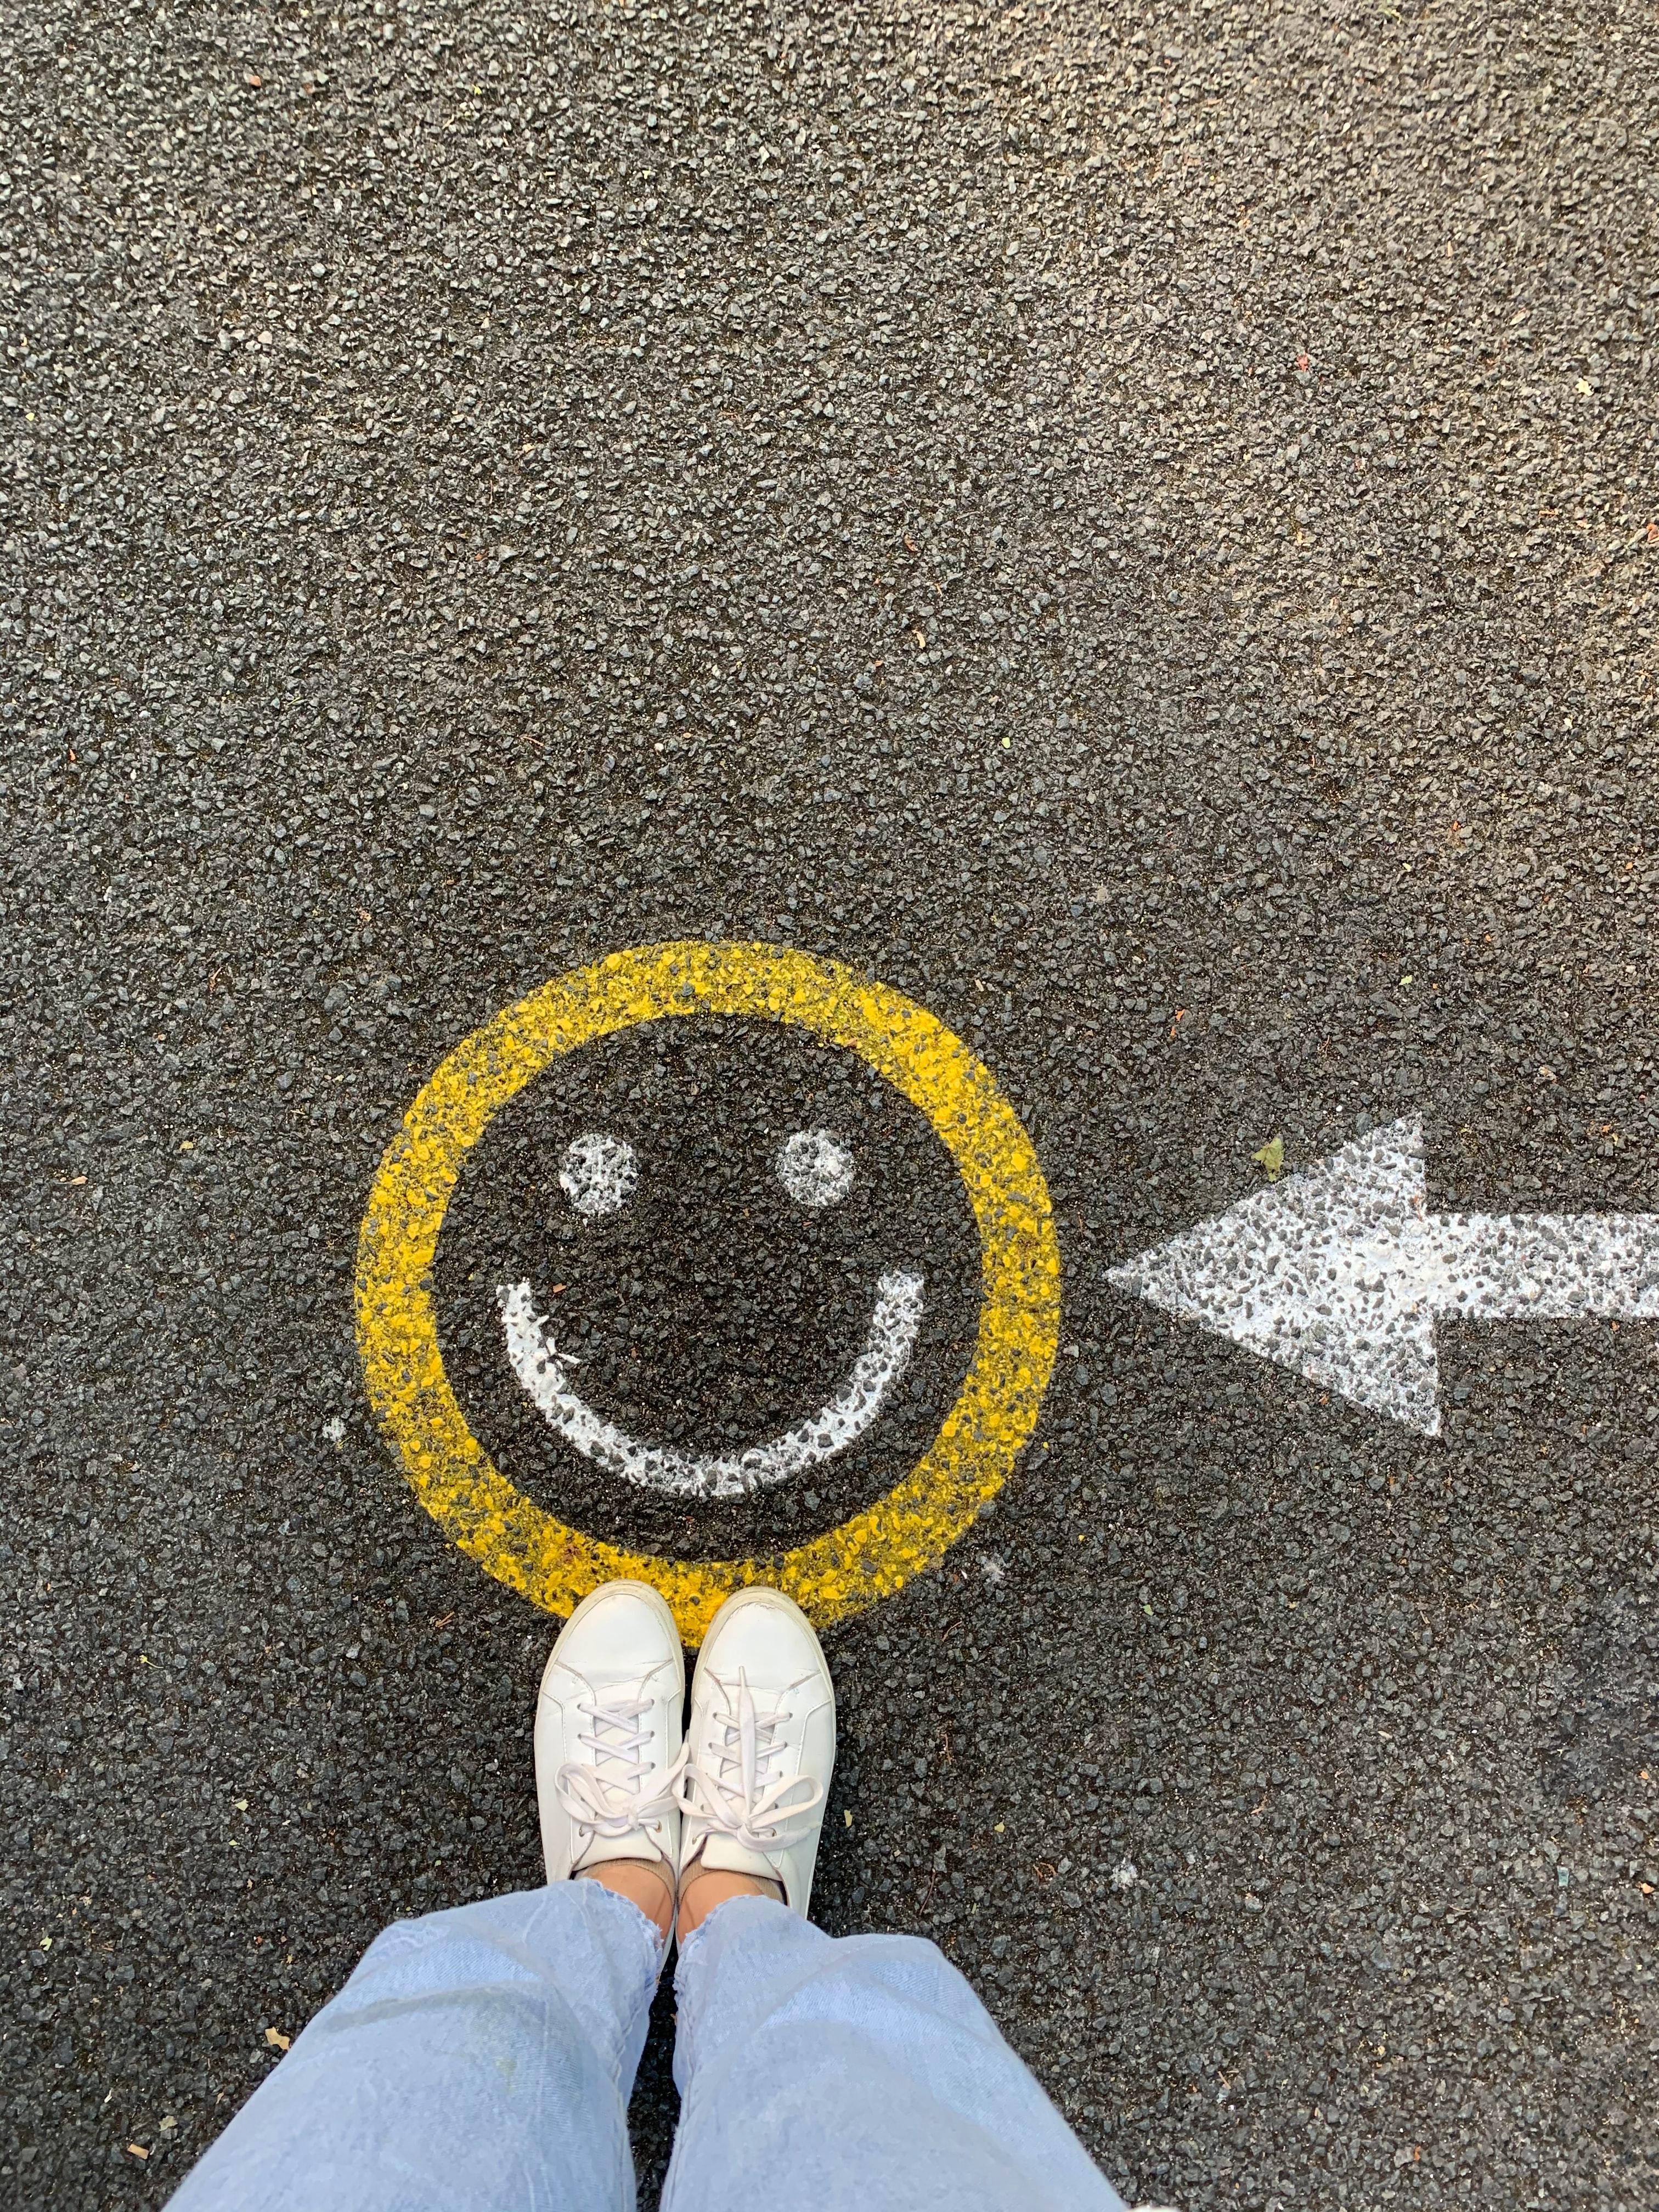 Person in white tennis shoes stands at a smiley face painted on asphalt iwth a white arrow pointing to the smiley face. 